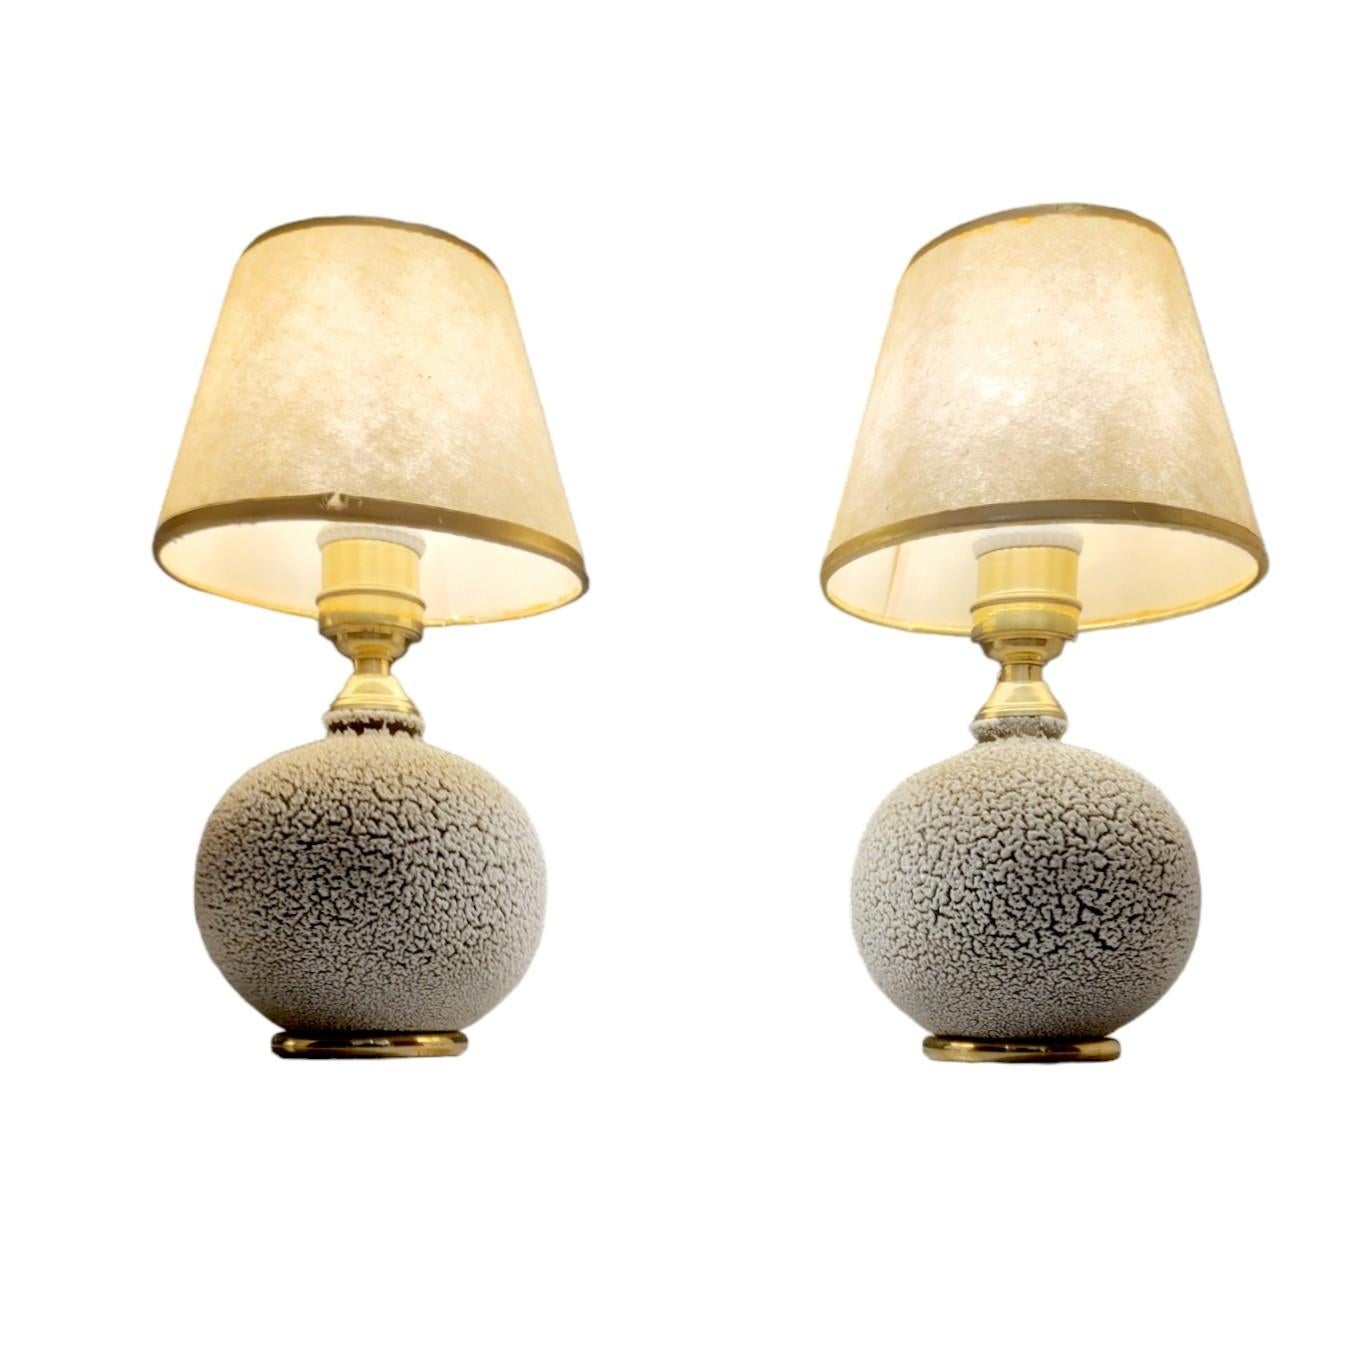 Paul Milet Style French Art Deco Table Lamps, 1930s For Sale 2